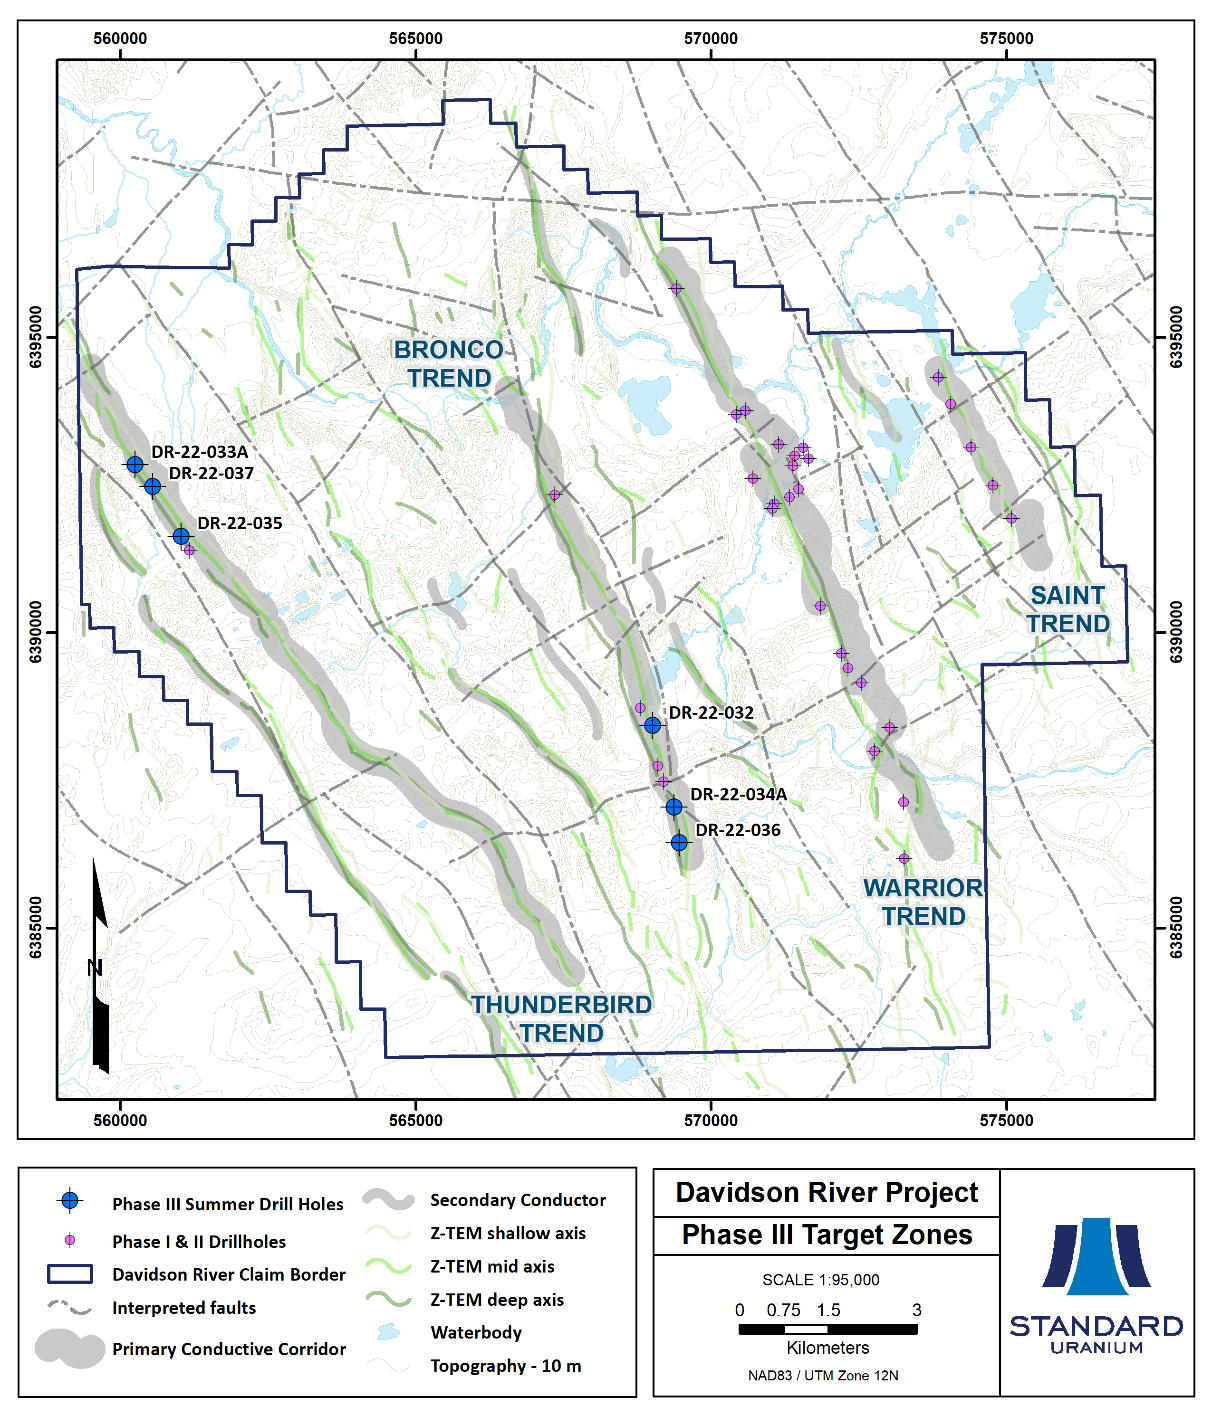 Figure 1. Plan map highlighting current Phase III Summer 2022 drill holes at Davidson River.